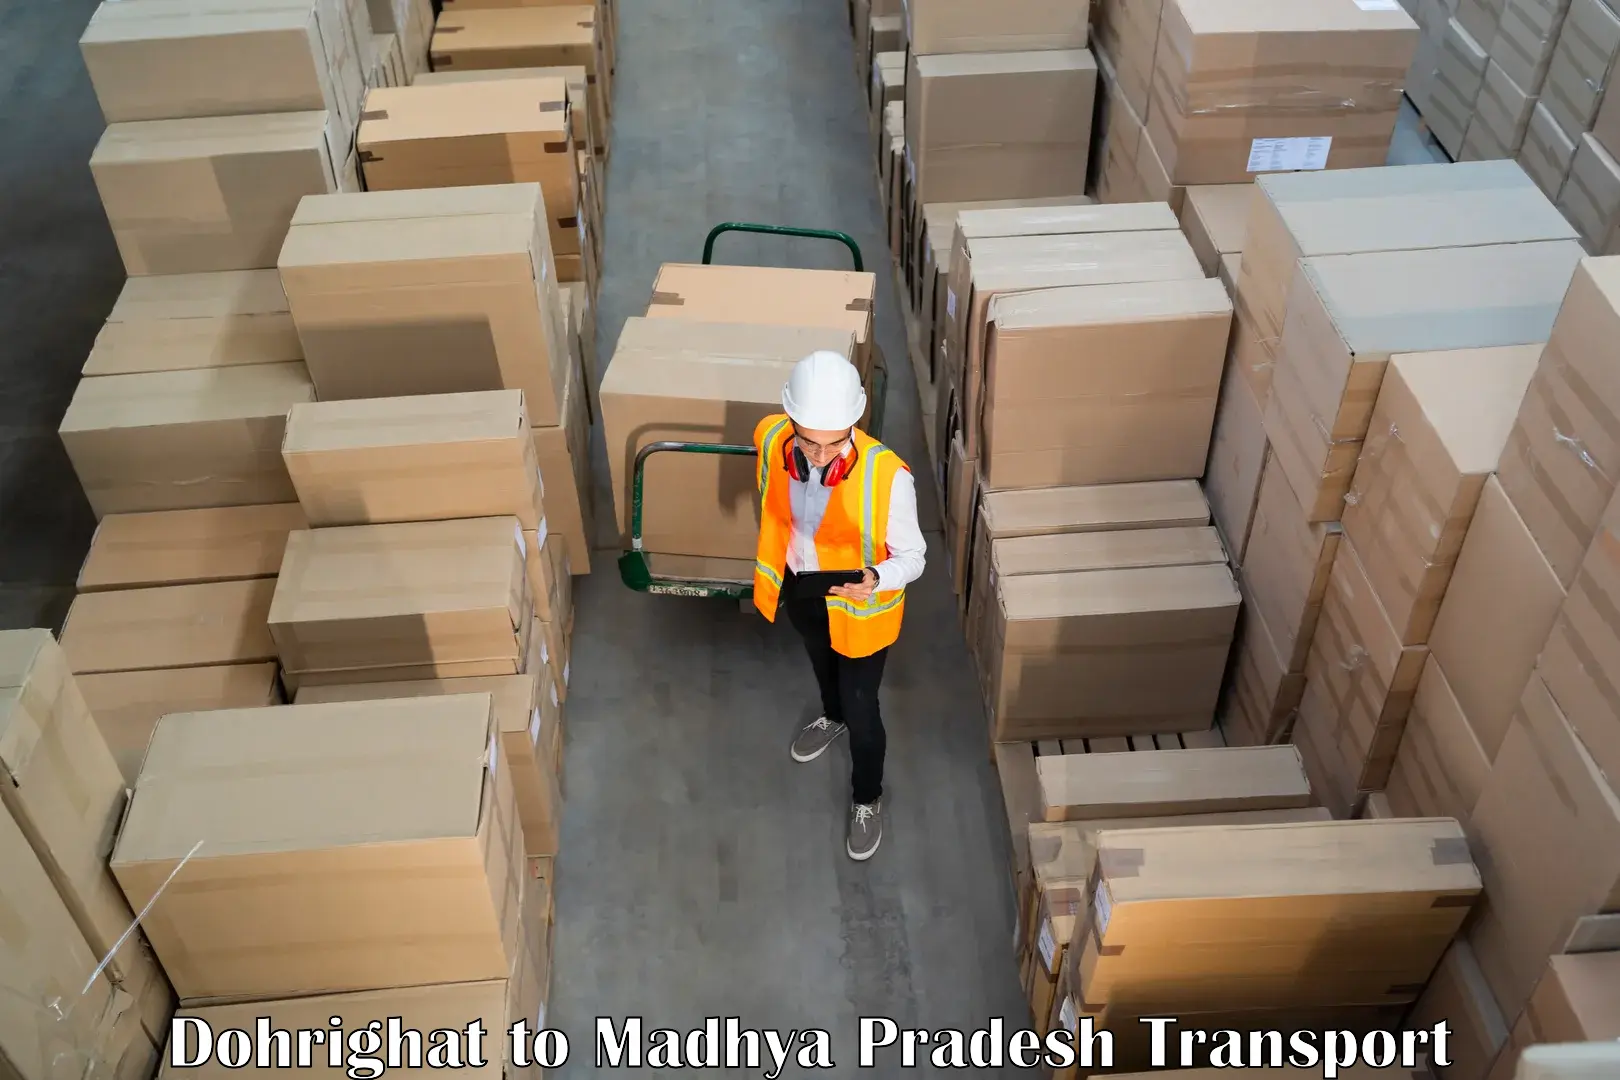 Container transport service Dohrighat to Amla